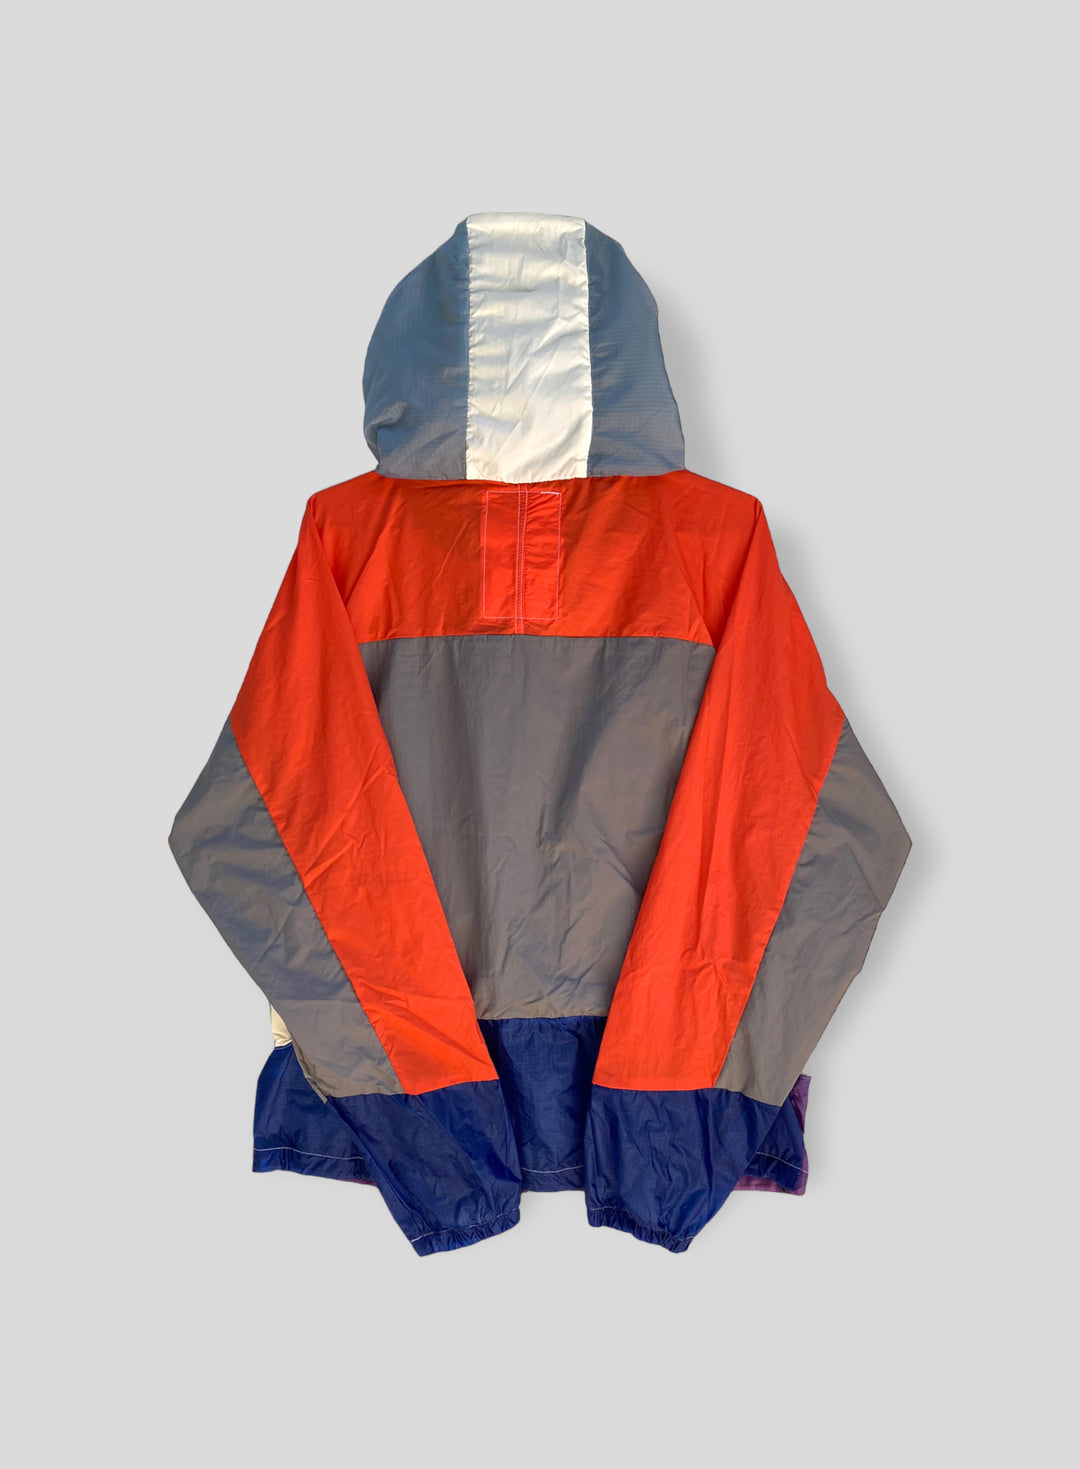 Upcycled Parachute Jacket (Small - S.a.58.22)